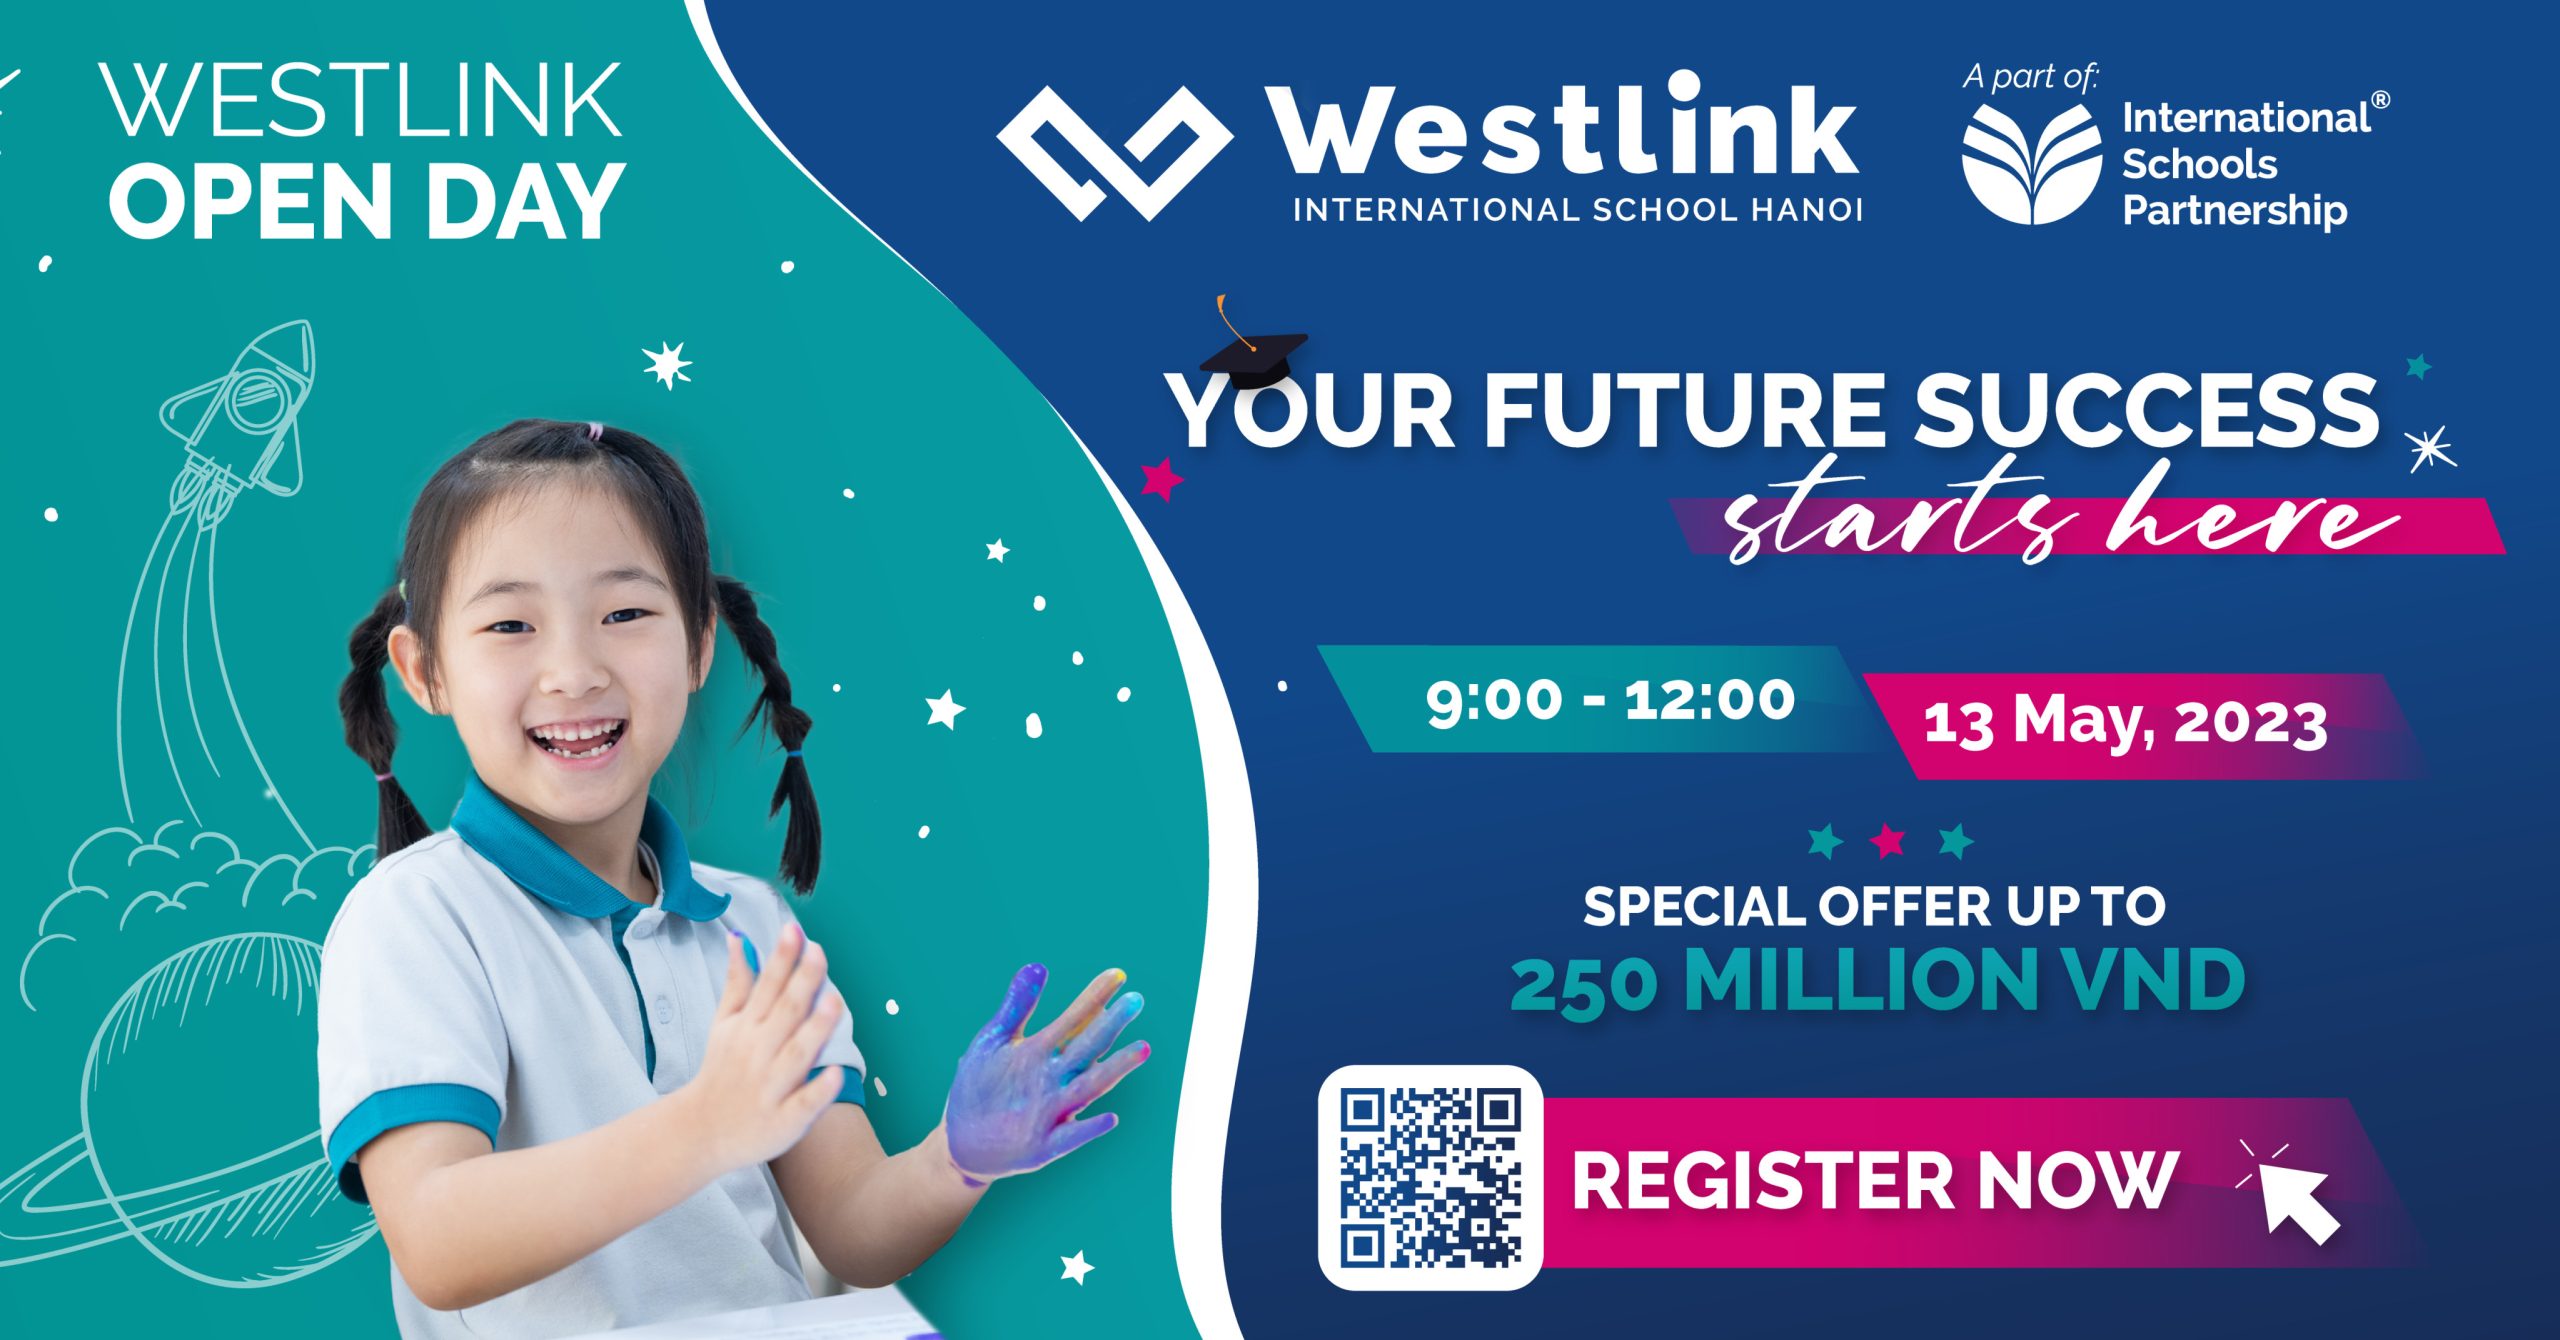 Westlink Open Day: “Your future success starts here”